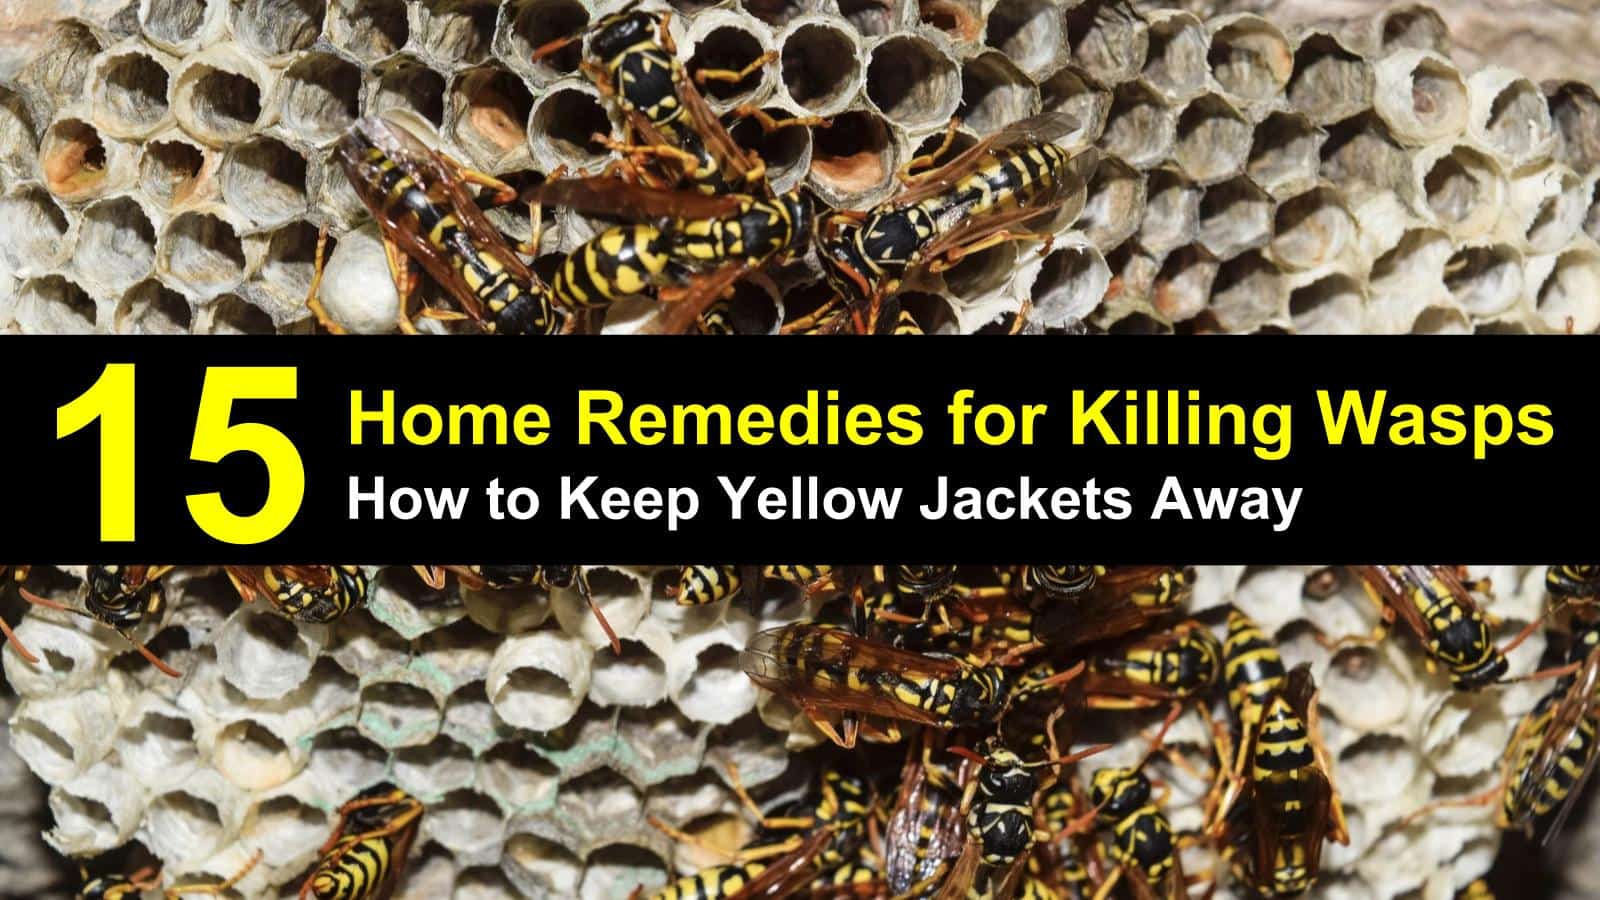 how to keep yellow jackets away titleimg